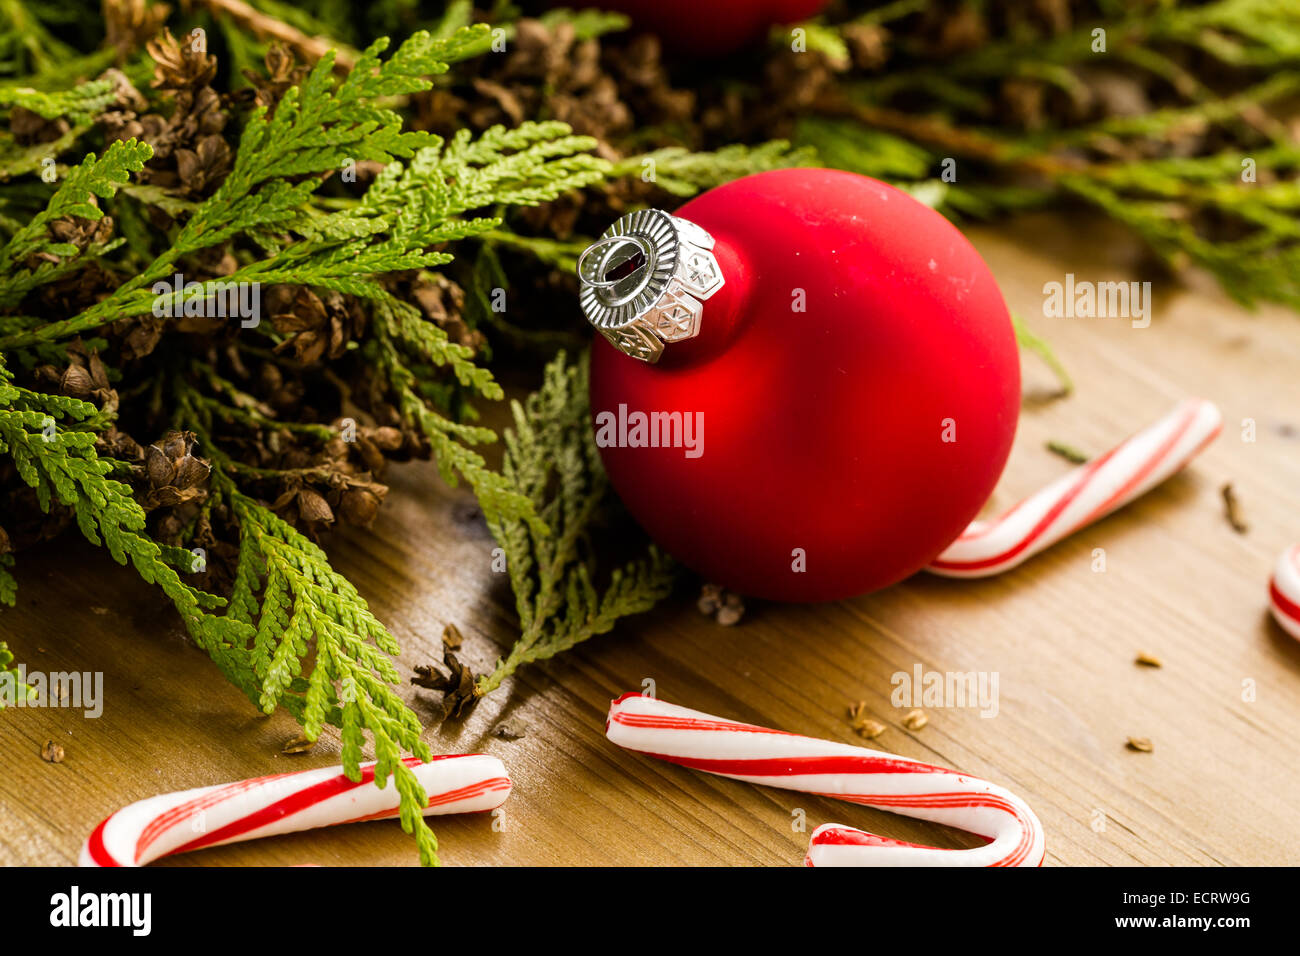 Red Christmas ornaments on stained wood table. Stock Photo